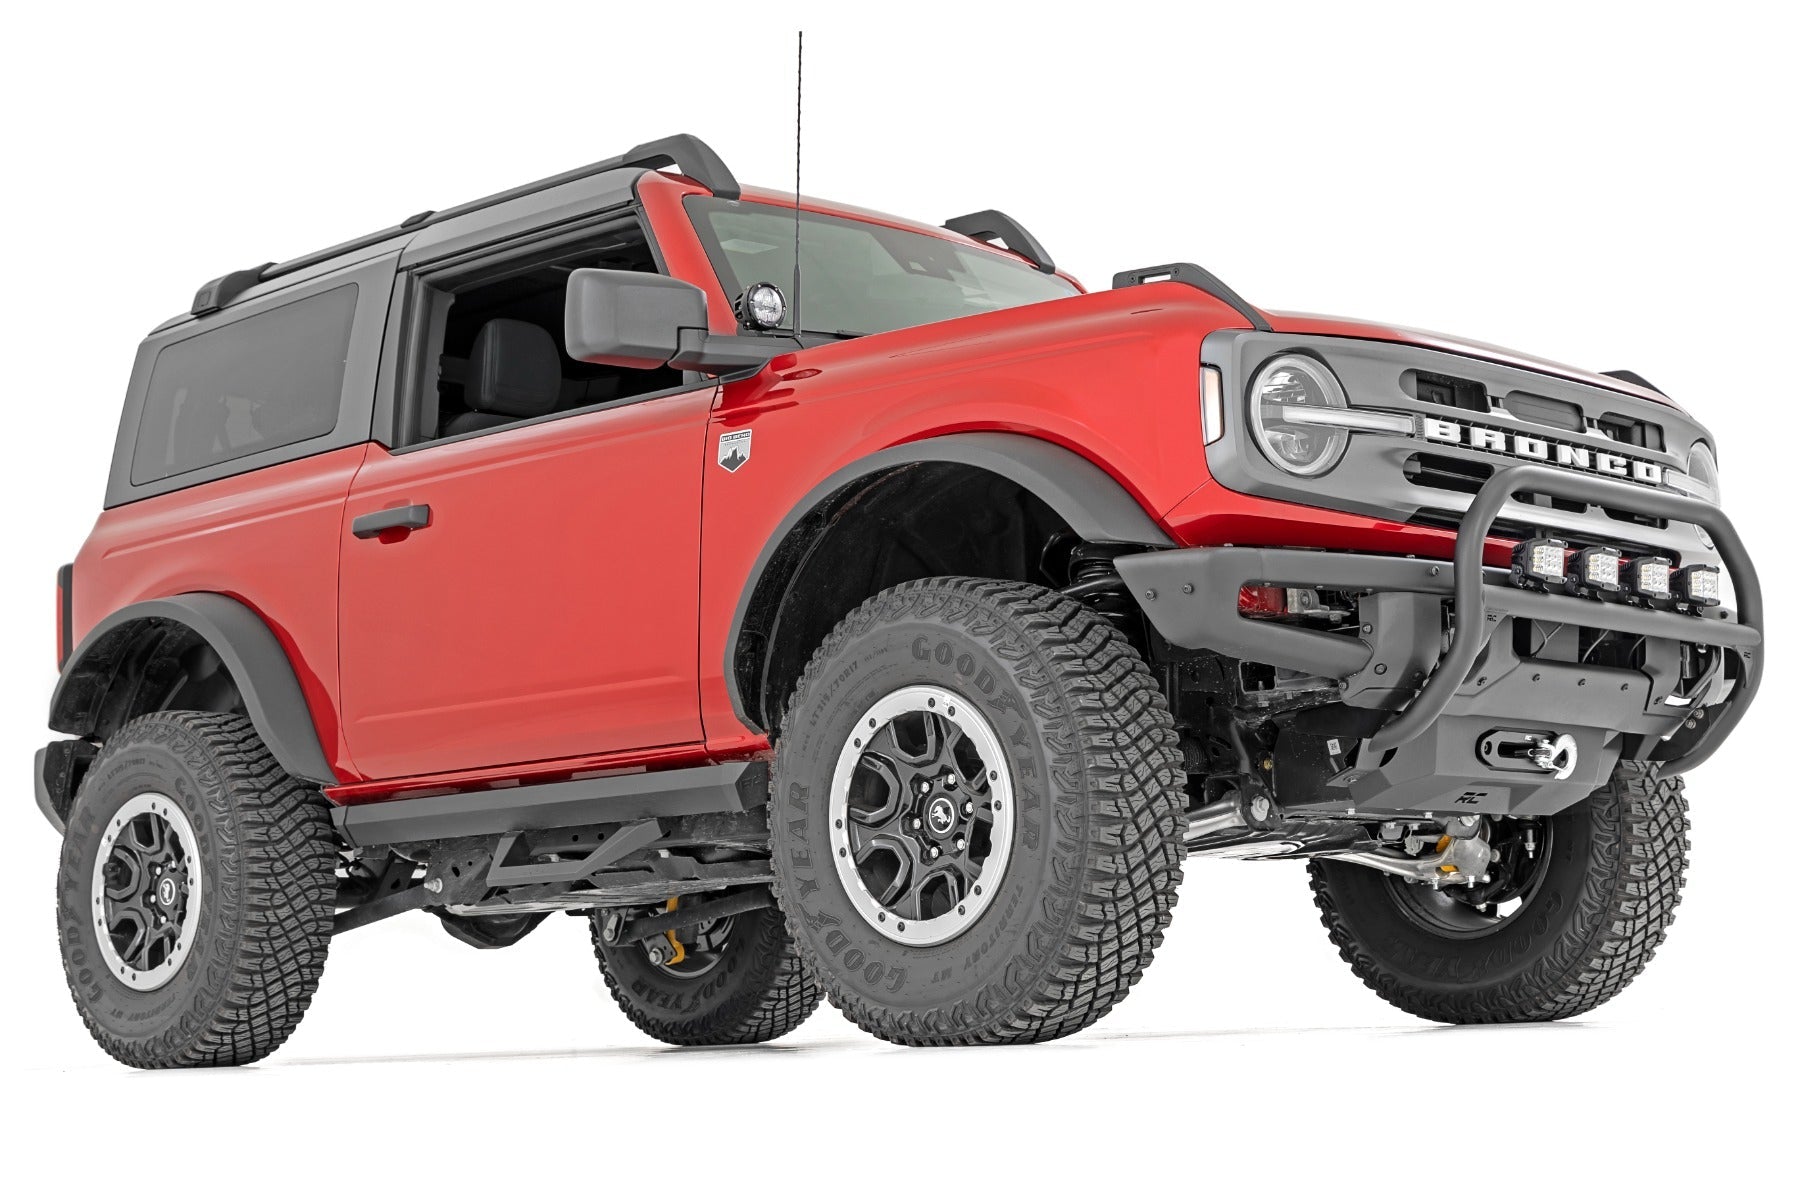 2.5 Inch Lift Kit Ford Bronco Sasquatch  | Rough Country